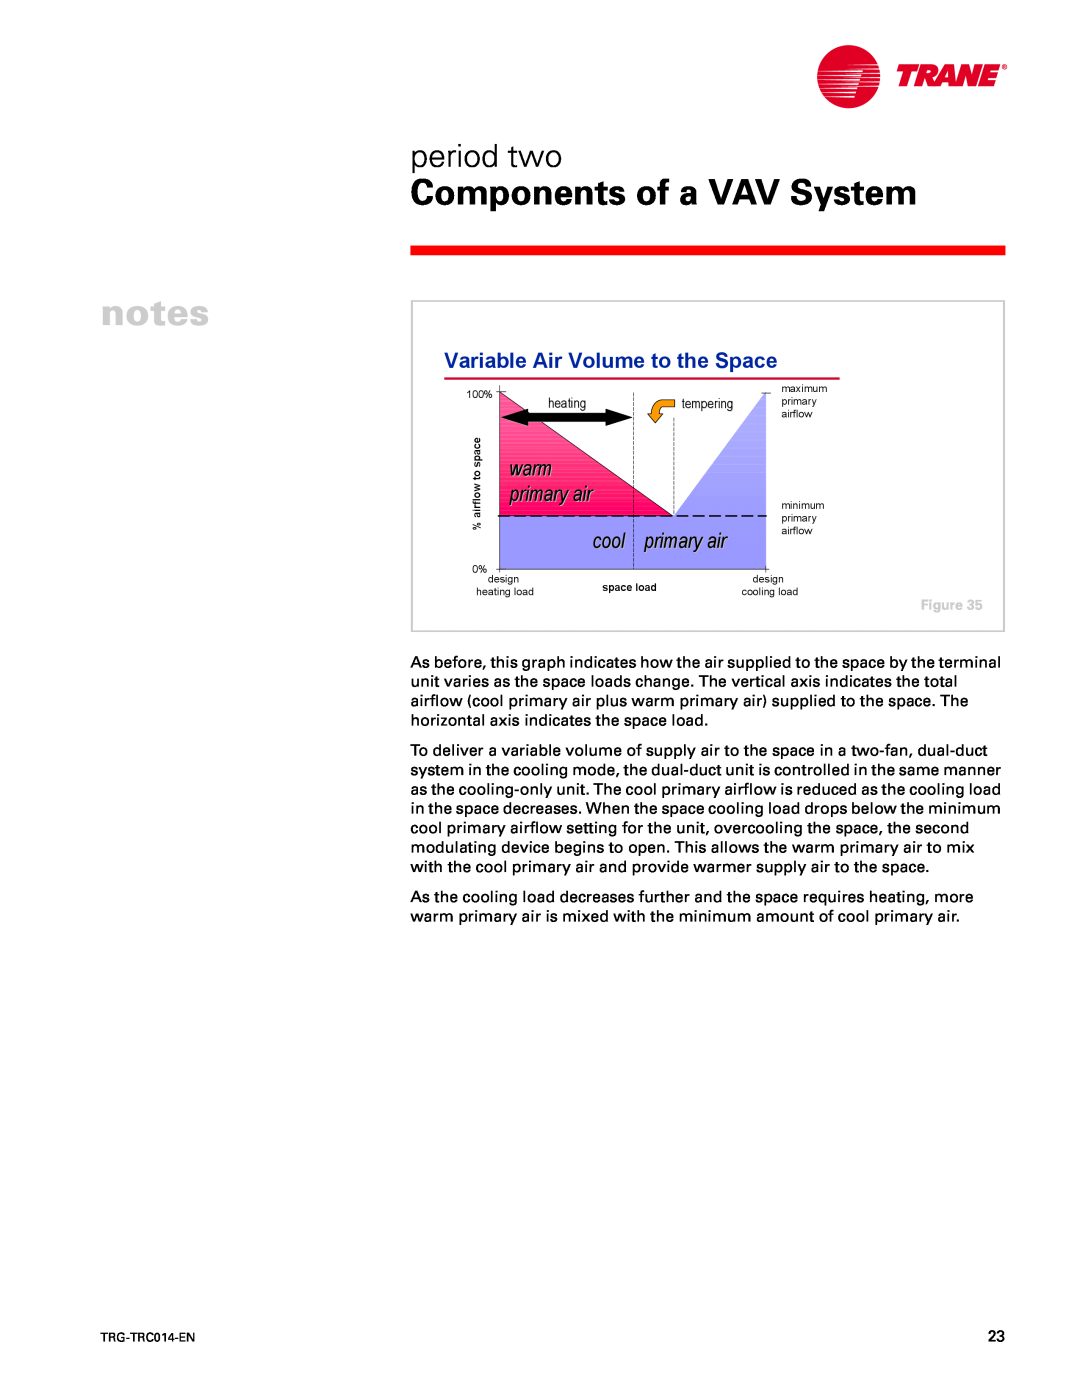 Trane TRG-TRC014-EN Variable Air Volume to the Space, warm, cool, Components of a VAV System, period two, primary air 